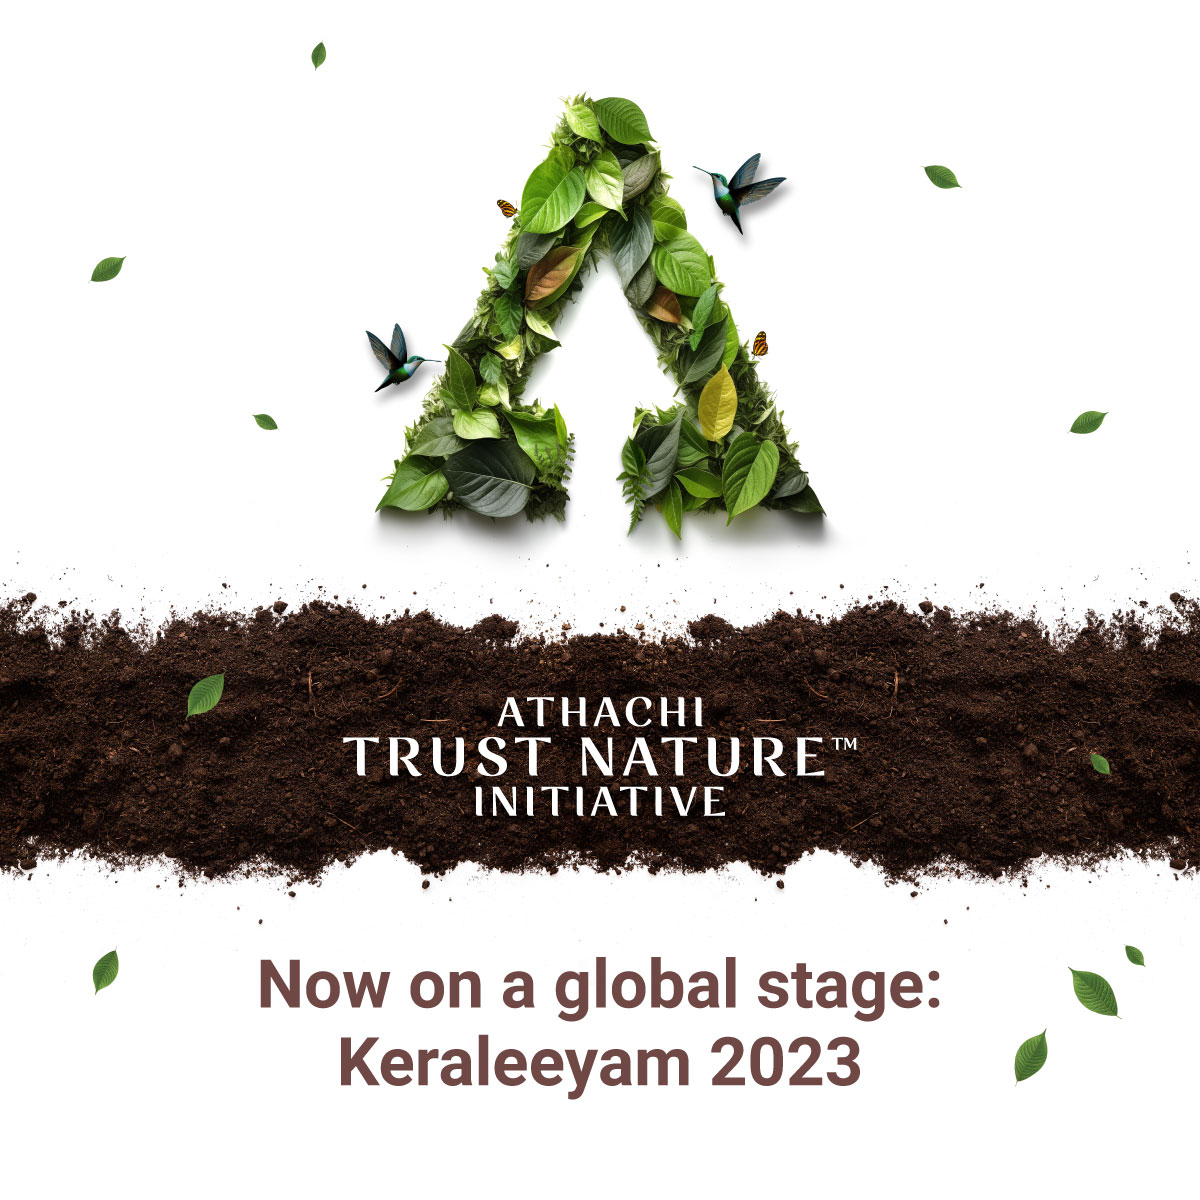 Proud to be handpicked by Govt of #Kerala to showcase our model of #Excellence in #Innovative, #SustainableBusiness, at the #Bizconnect #Keraleeyam2023. Come, see #TrustNature™ initiative, a long-term solution to preserve, protect, and re-empower nature, take global stage.